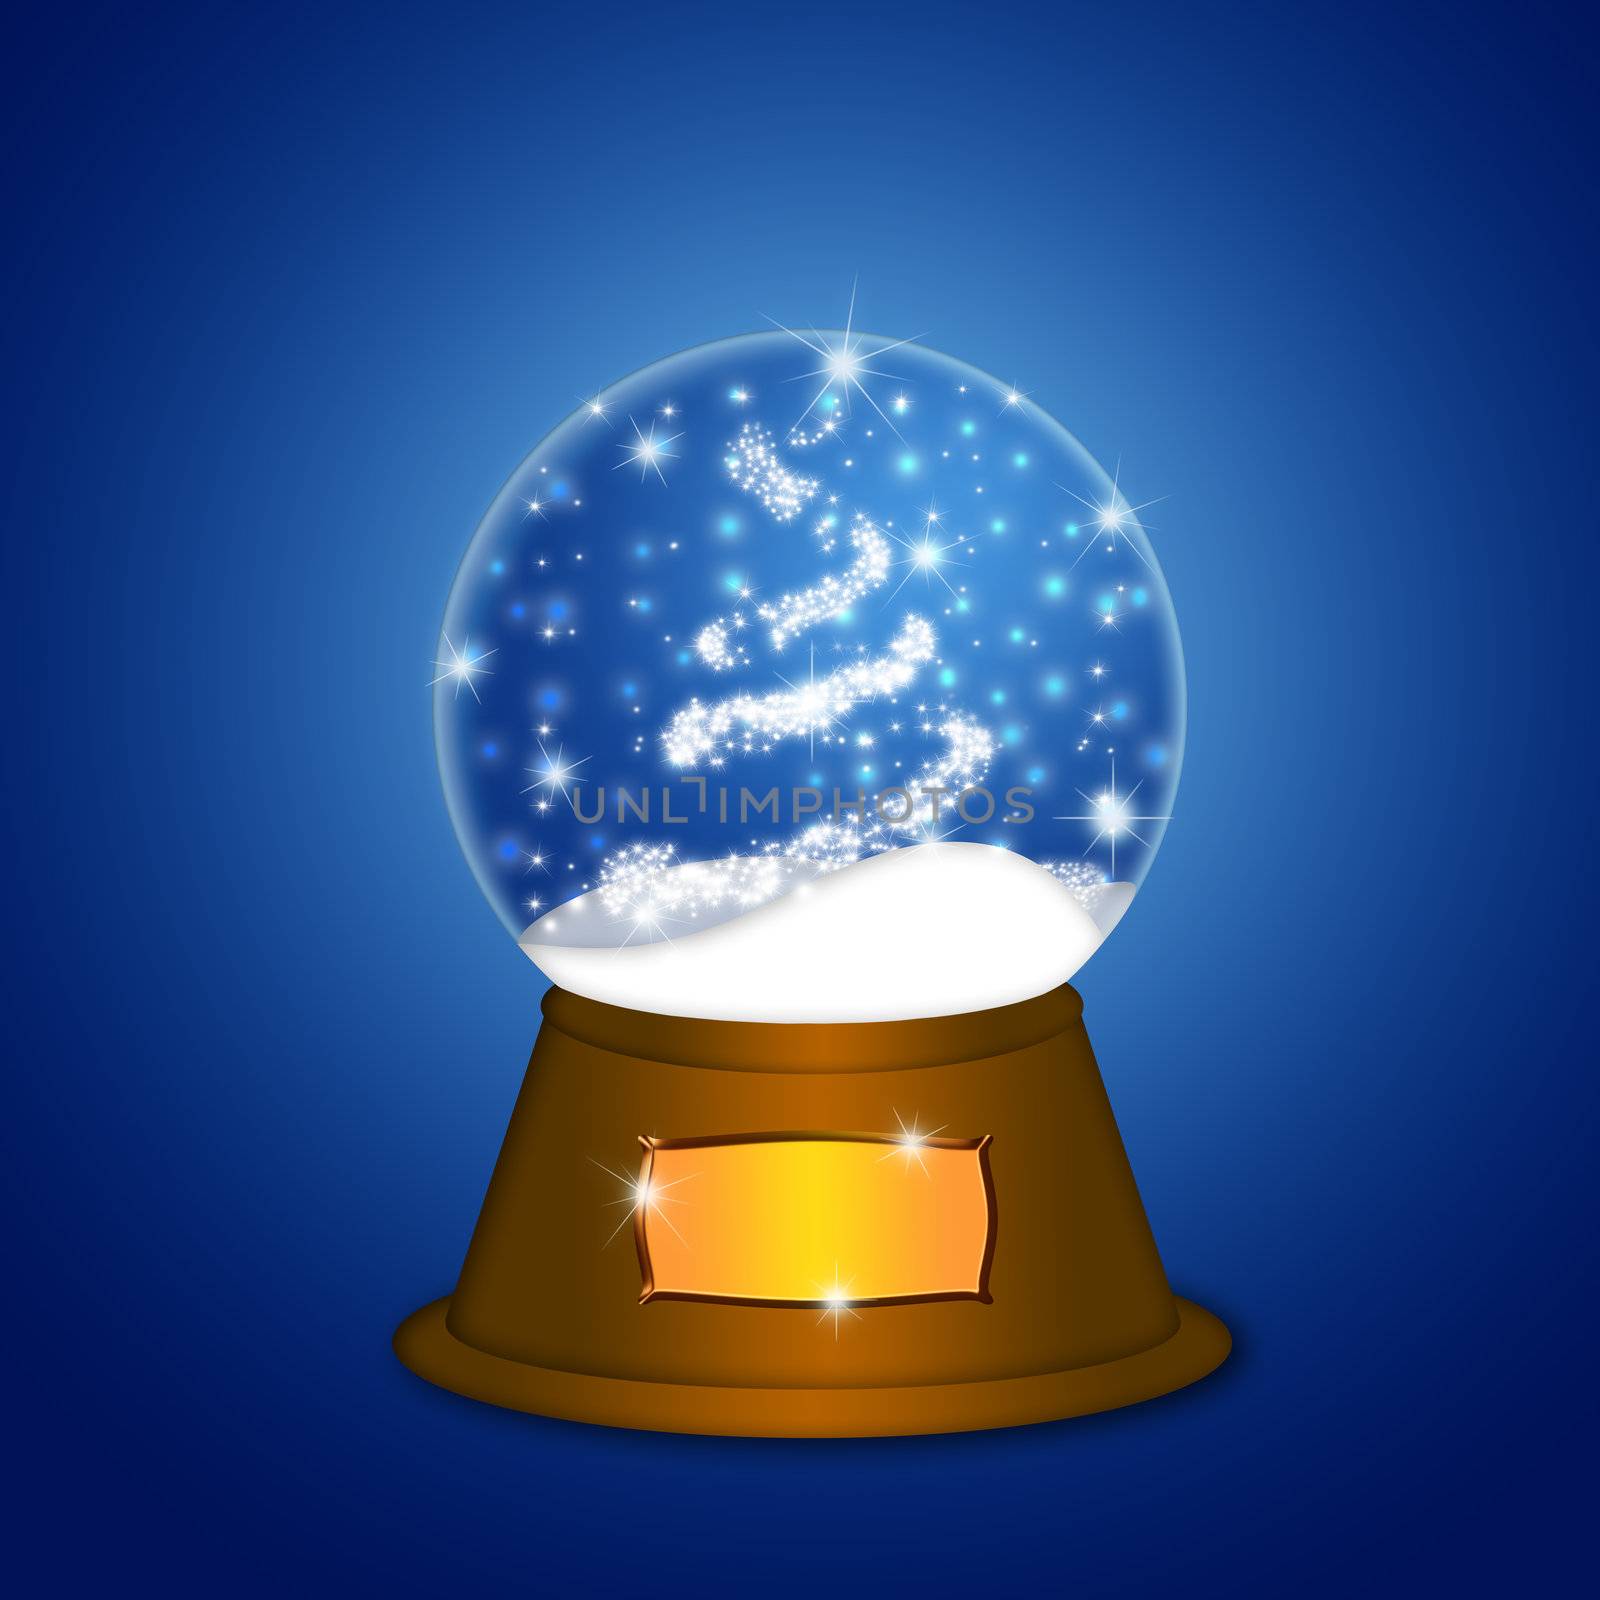 Water Snow Globe with Christmas Tree Sparkles by jpldesigns